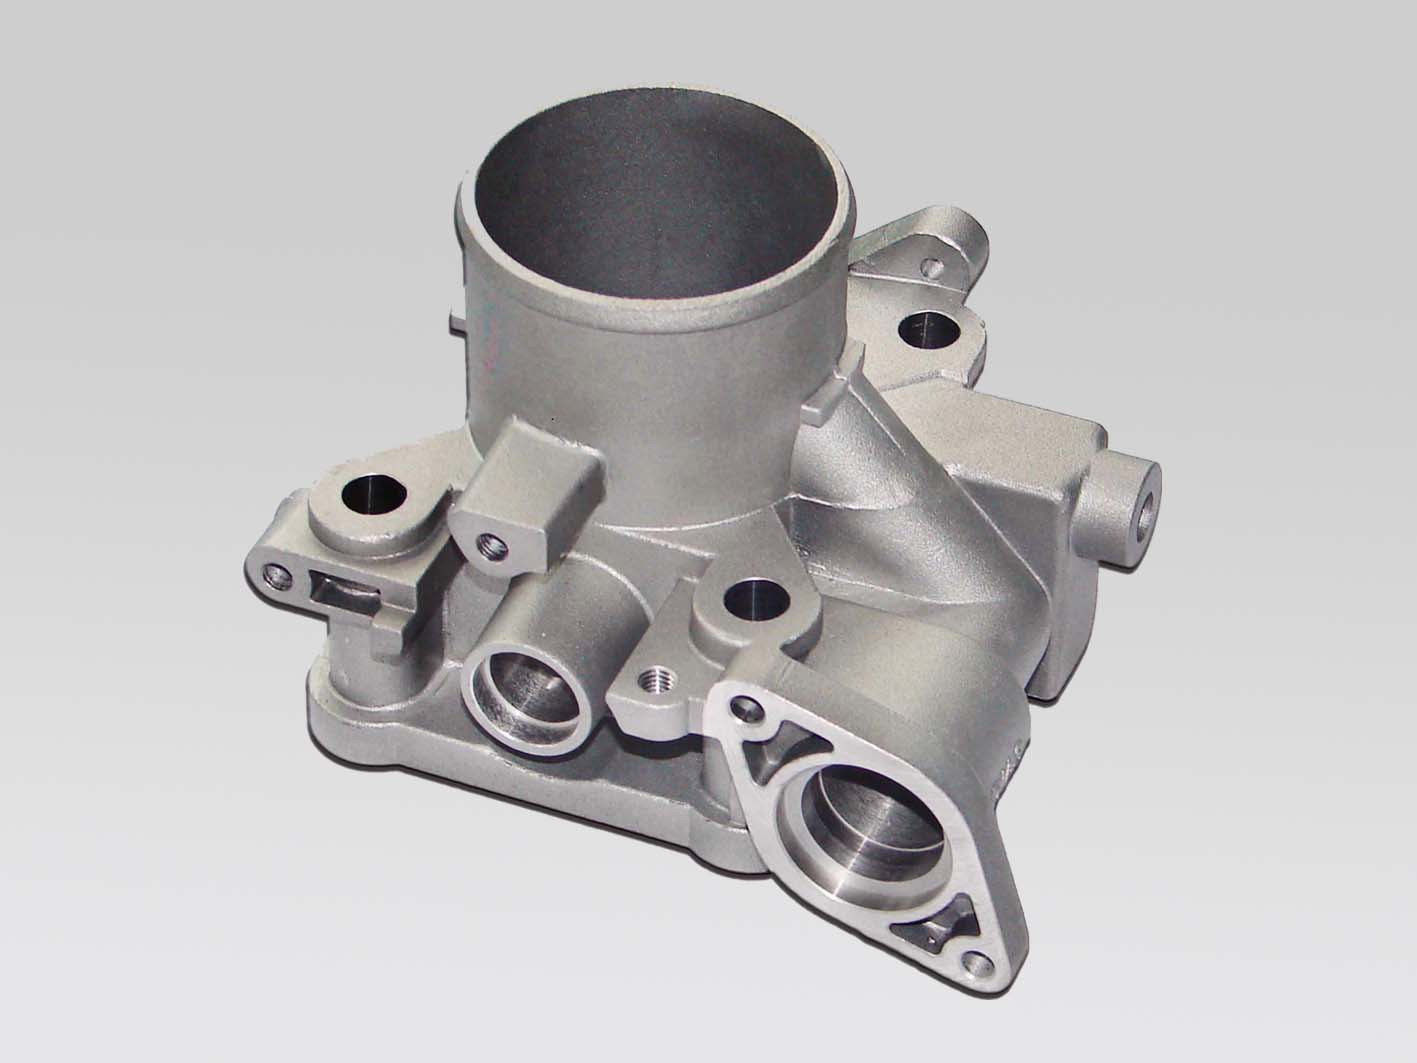  Aluminum alloy die casting technology requirements